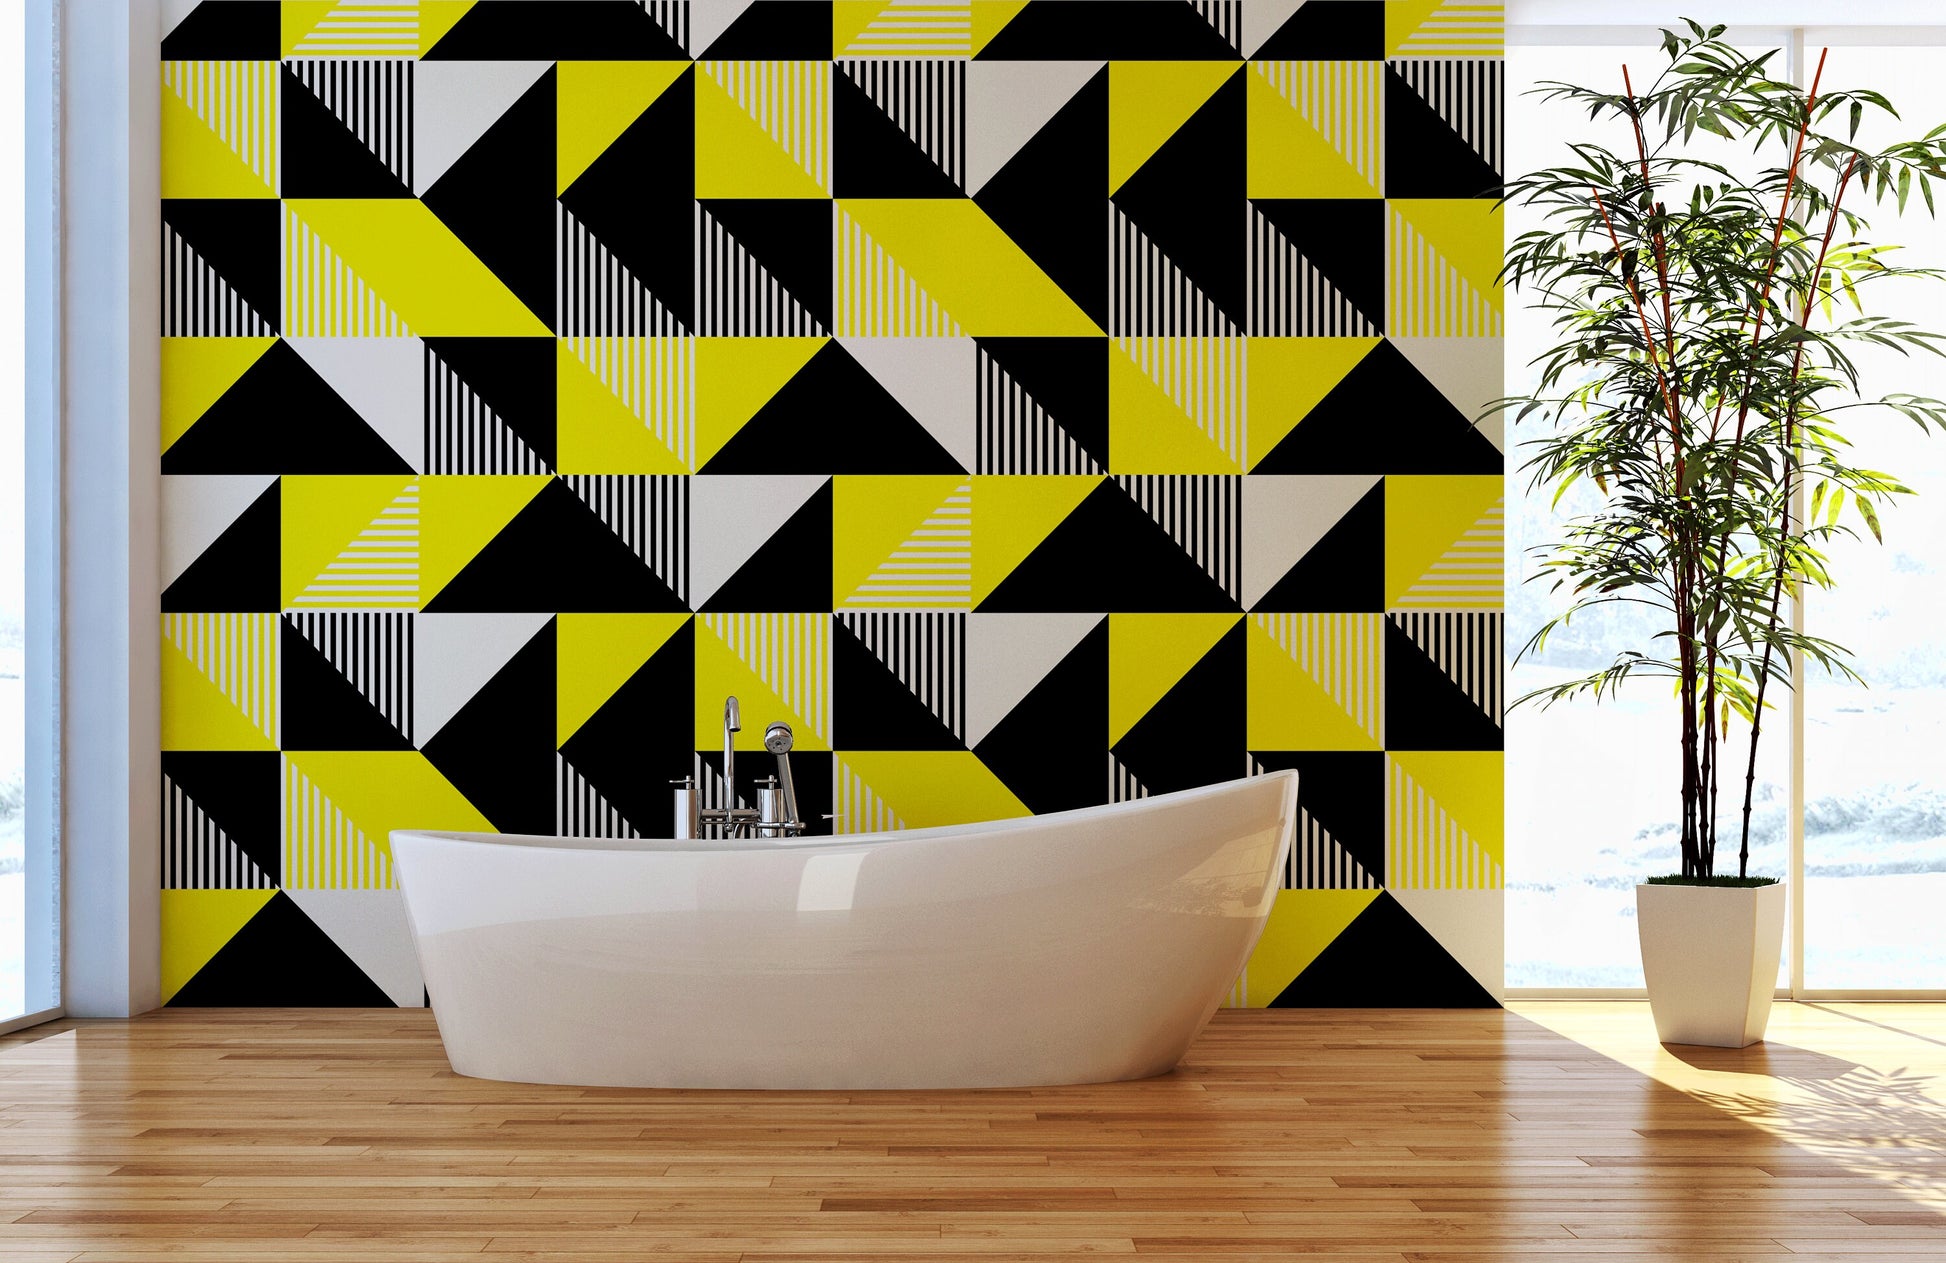 Wallpaper Peel and Stick Wallpaper Removable Wallpaper Home Decor Wall Art Wall Decor Room Decor/ Black and Yellow Geometric Wallpaper -B076